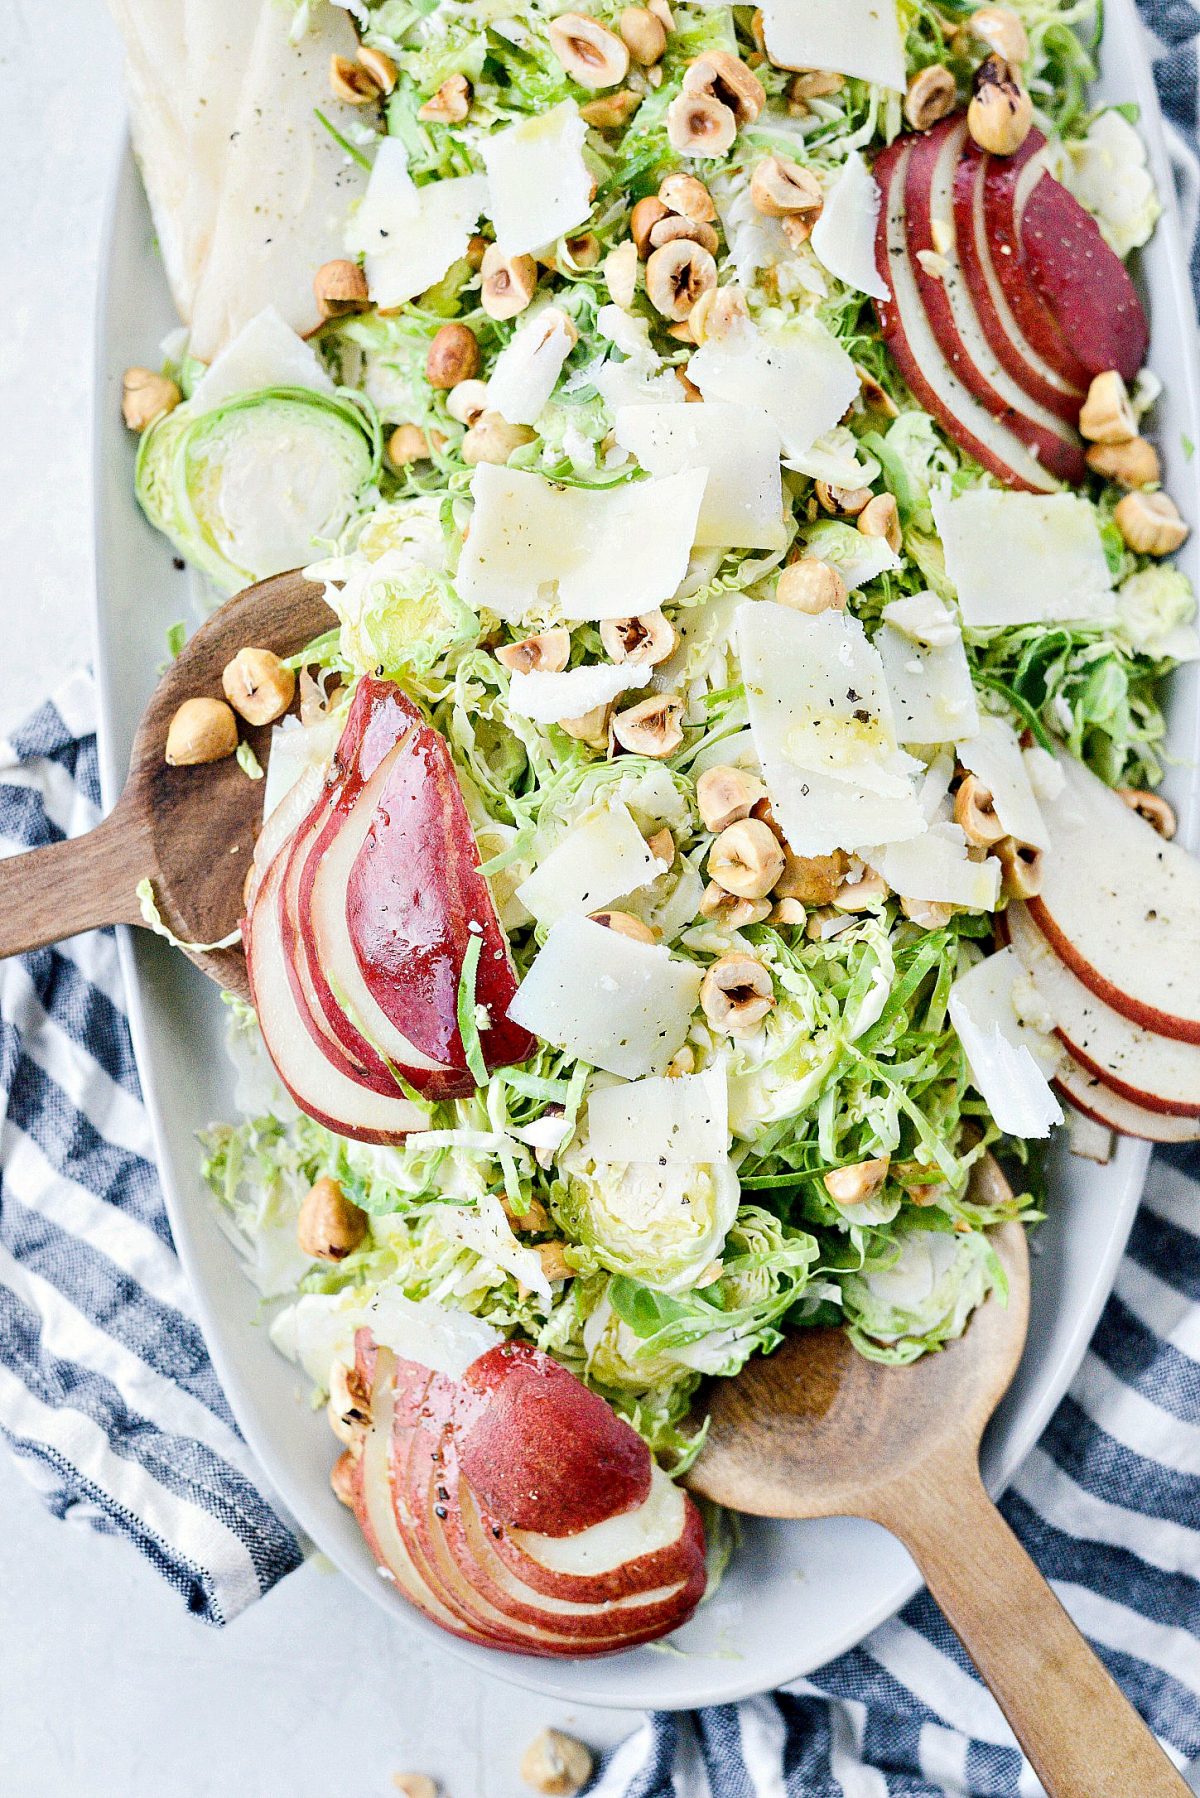 Shaved-Brussels-Sprout-Salad-with-Pear-Parmesan-and-Hazelnuts-l-SimplyScratch.com-18